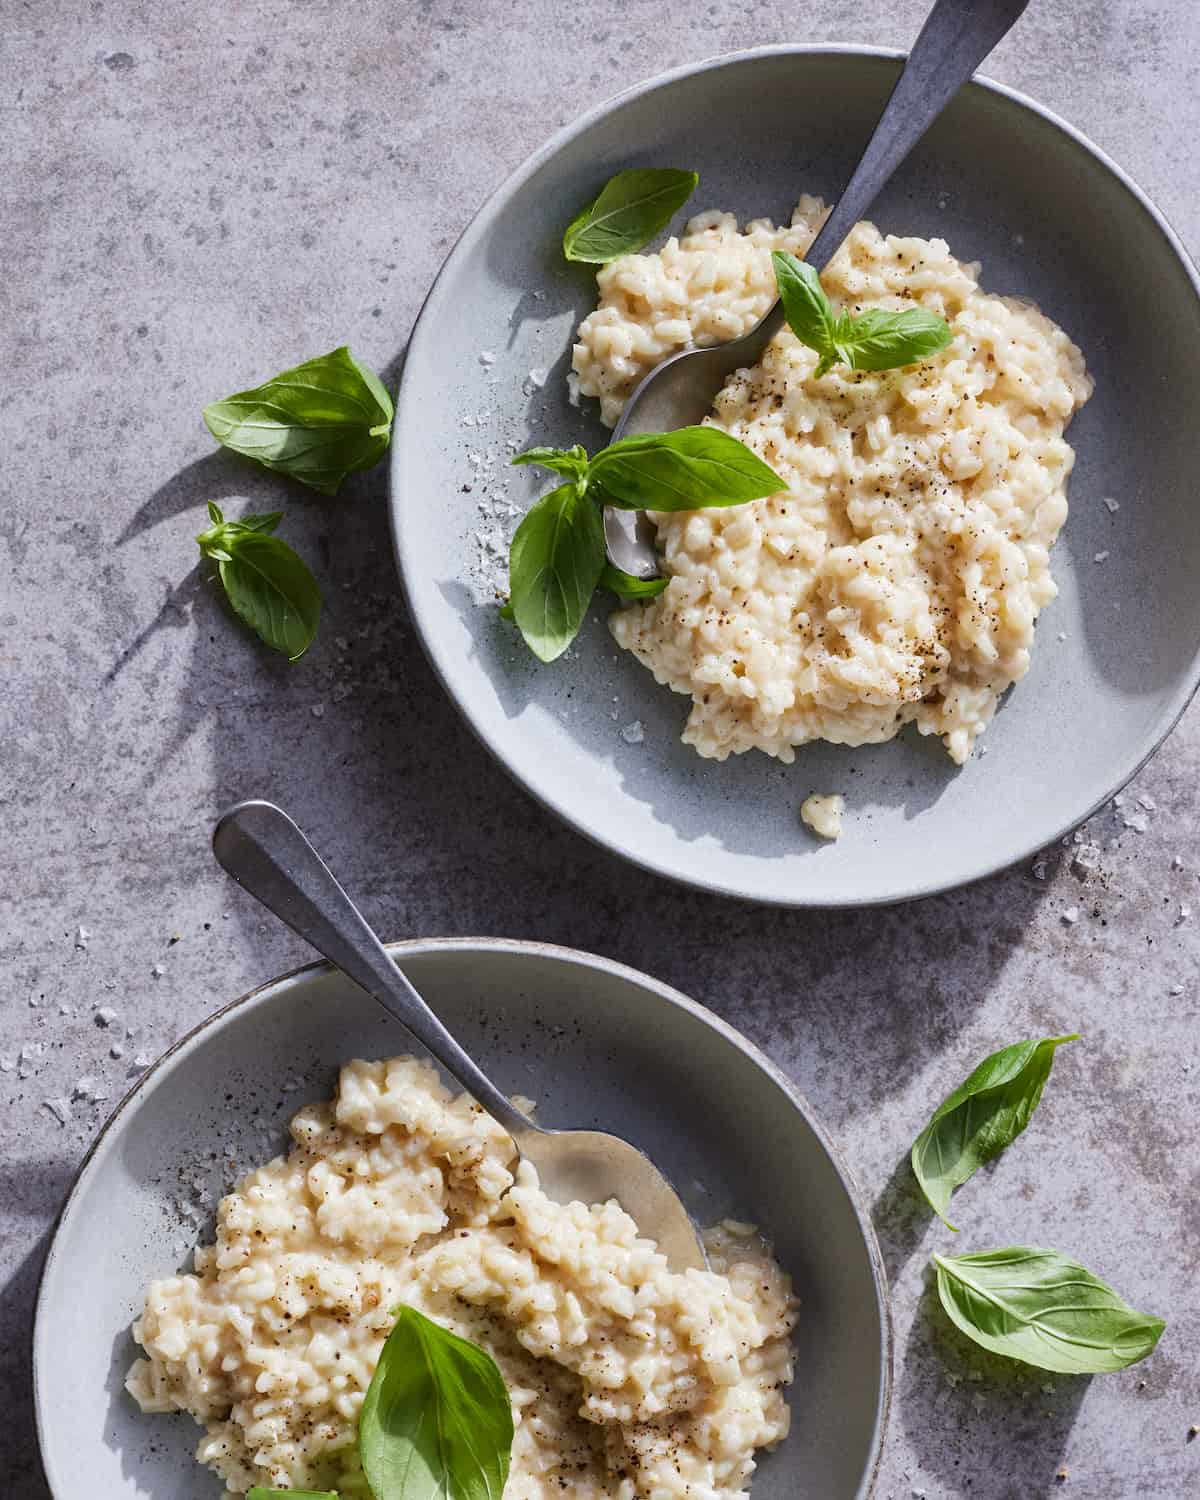 an overhead shot of two shallow grey bowls of goat cheese risotto sitting on a grey concrete tabletop. the risotto is garnished with freshly cracked black pepper salt and basil leaves. a silver spoon rests on the edge of the bowl